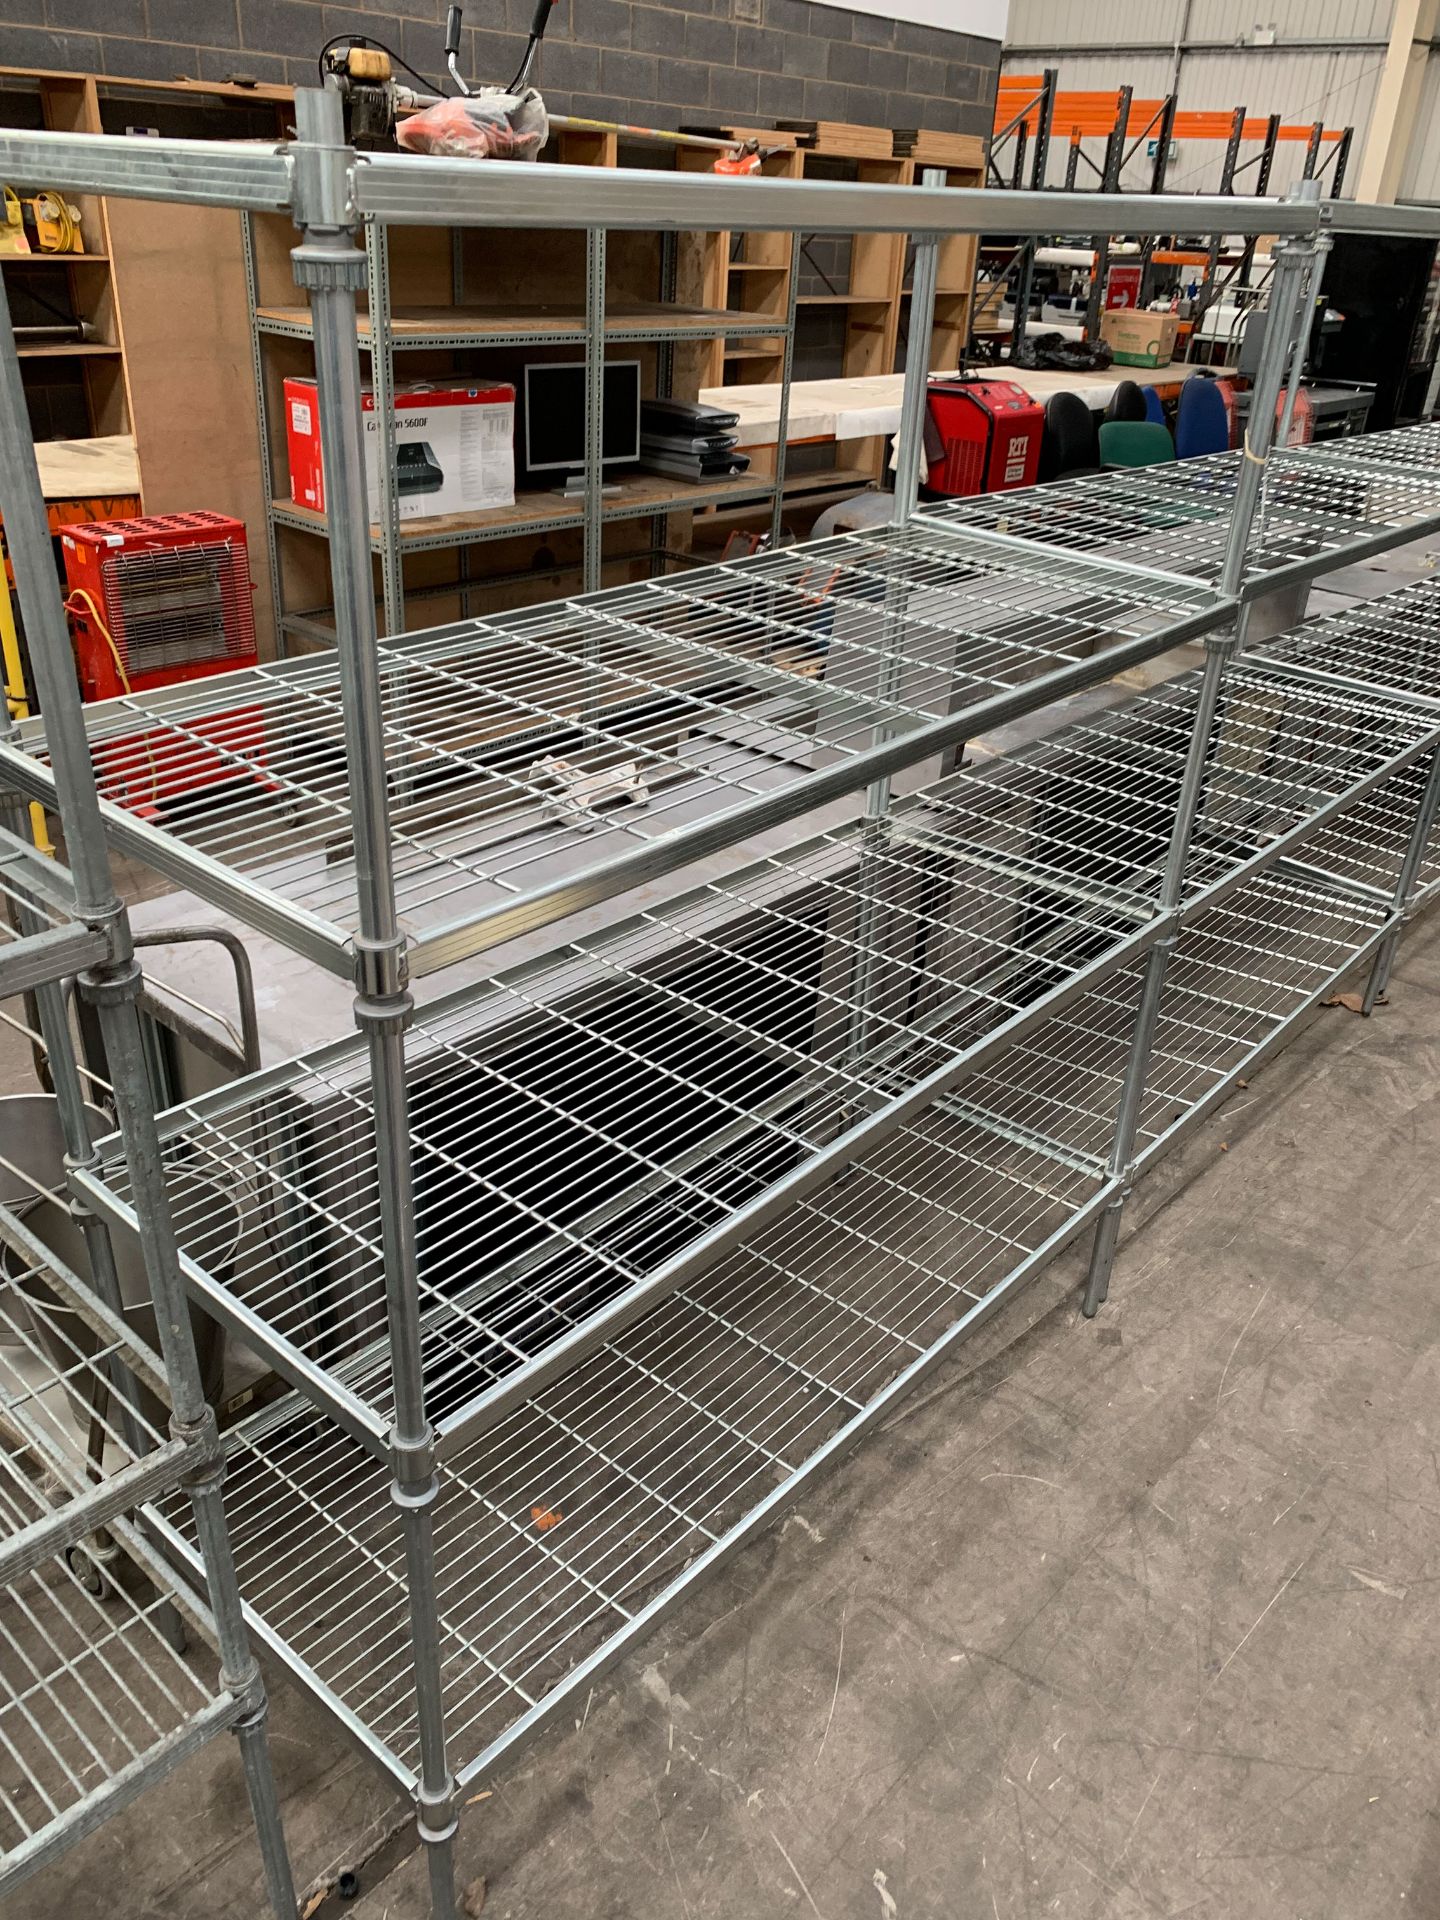 4x Boltless Wire Racks each with 4 Shelves - Image 3 of 5